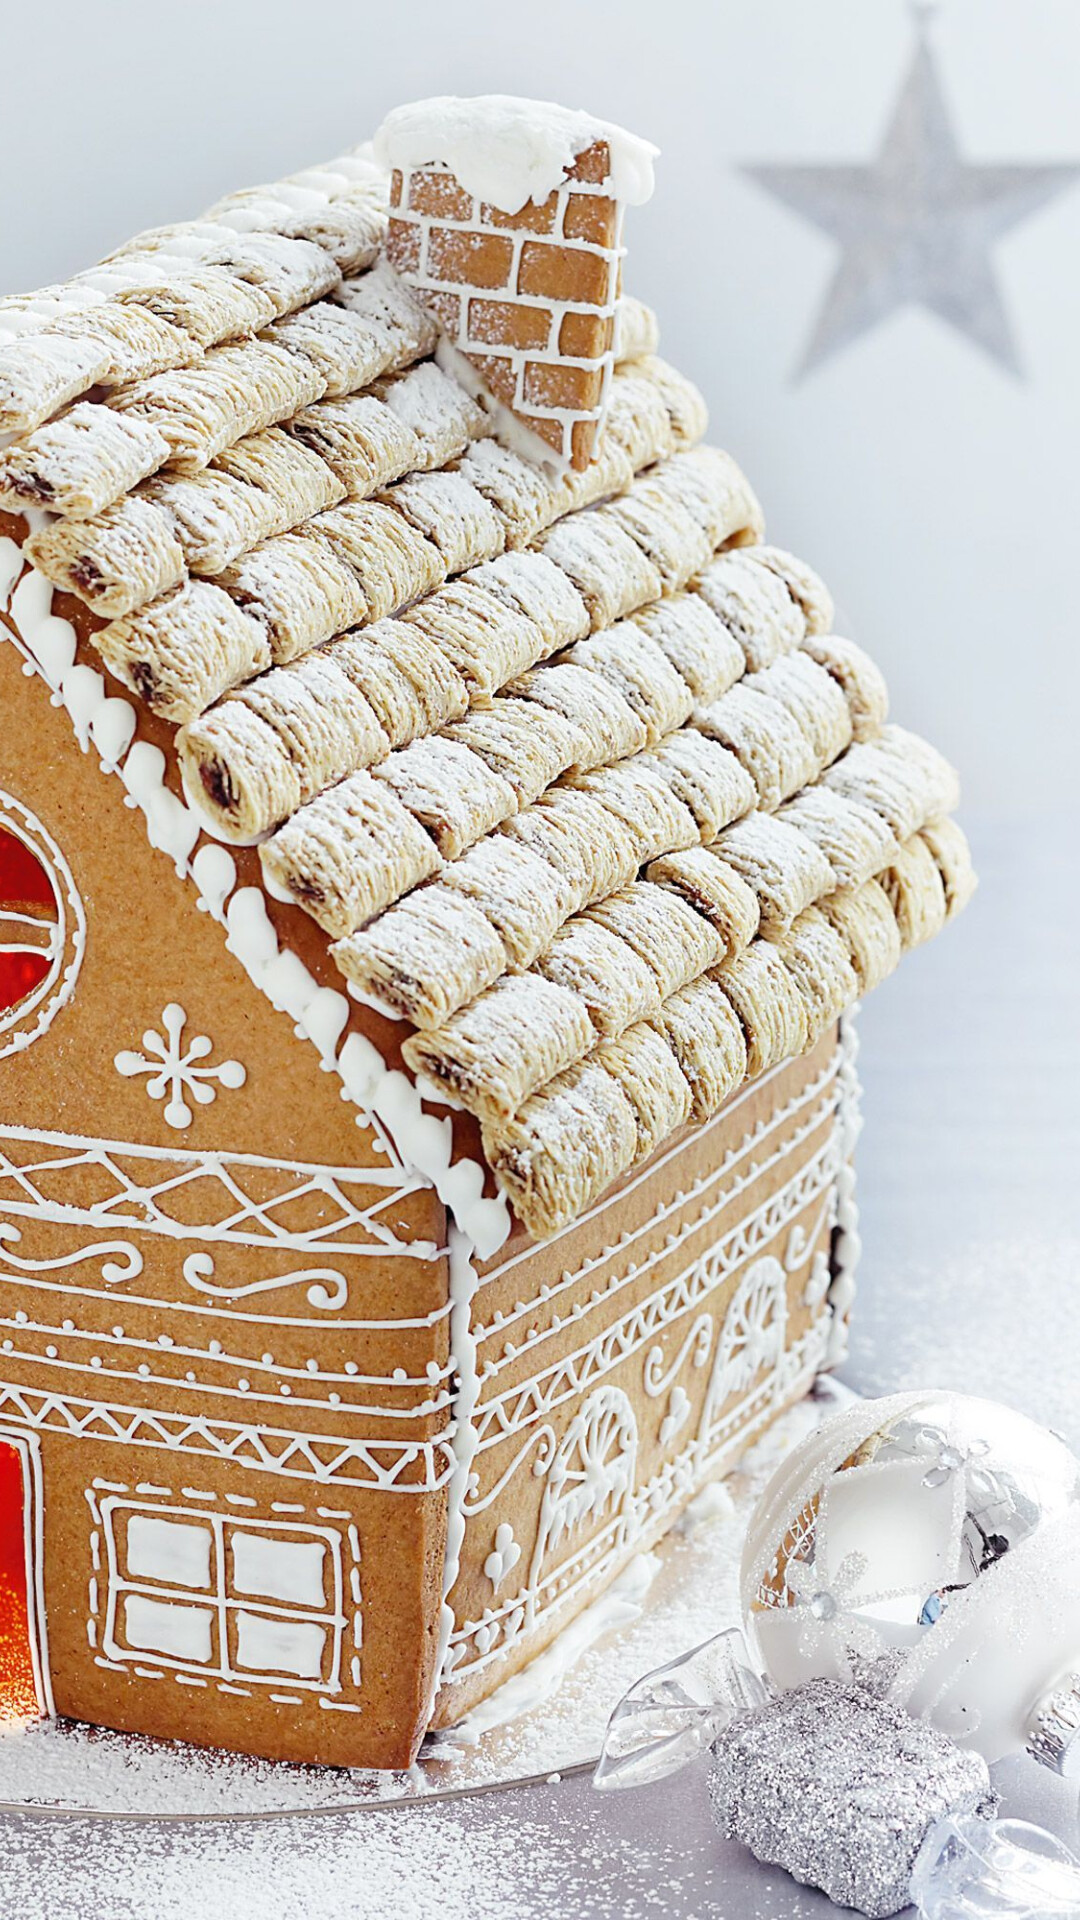 Gingerbread House: Elaborate cookie-walled houses, Gingerbread Christmas tree ornaments, Festive Christmas decoration. 1080x1920 Full HD Background.